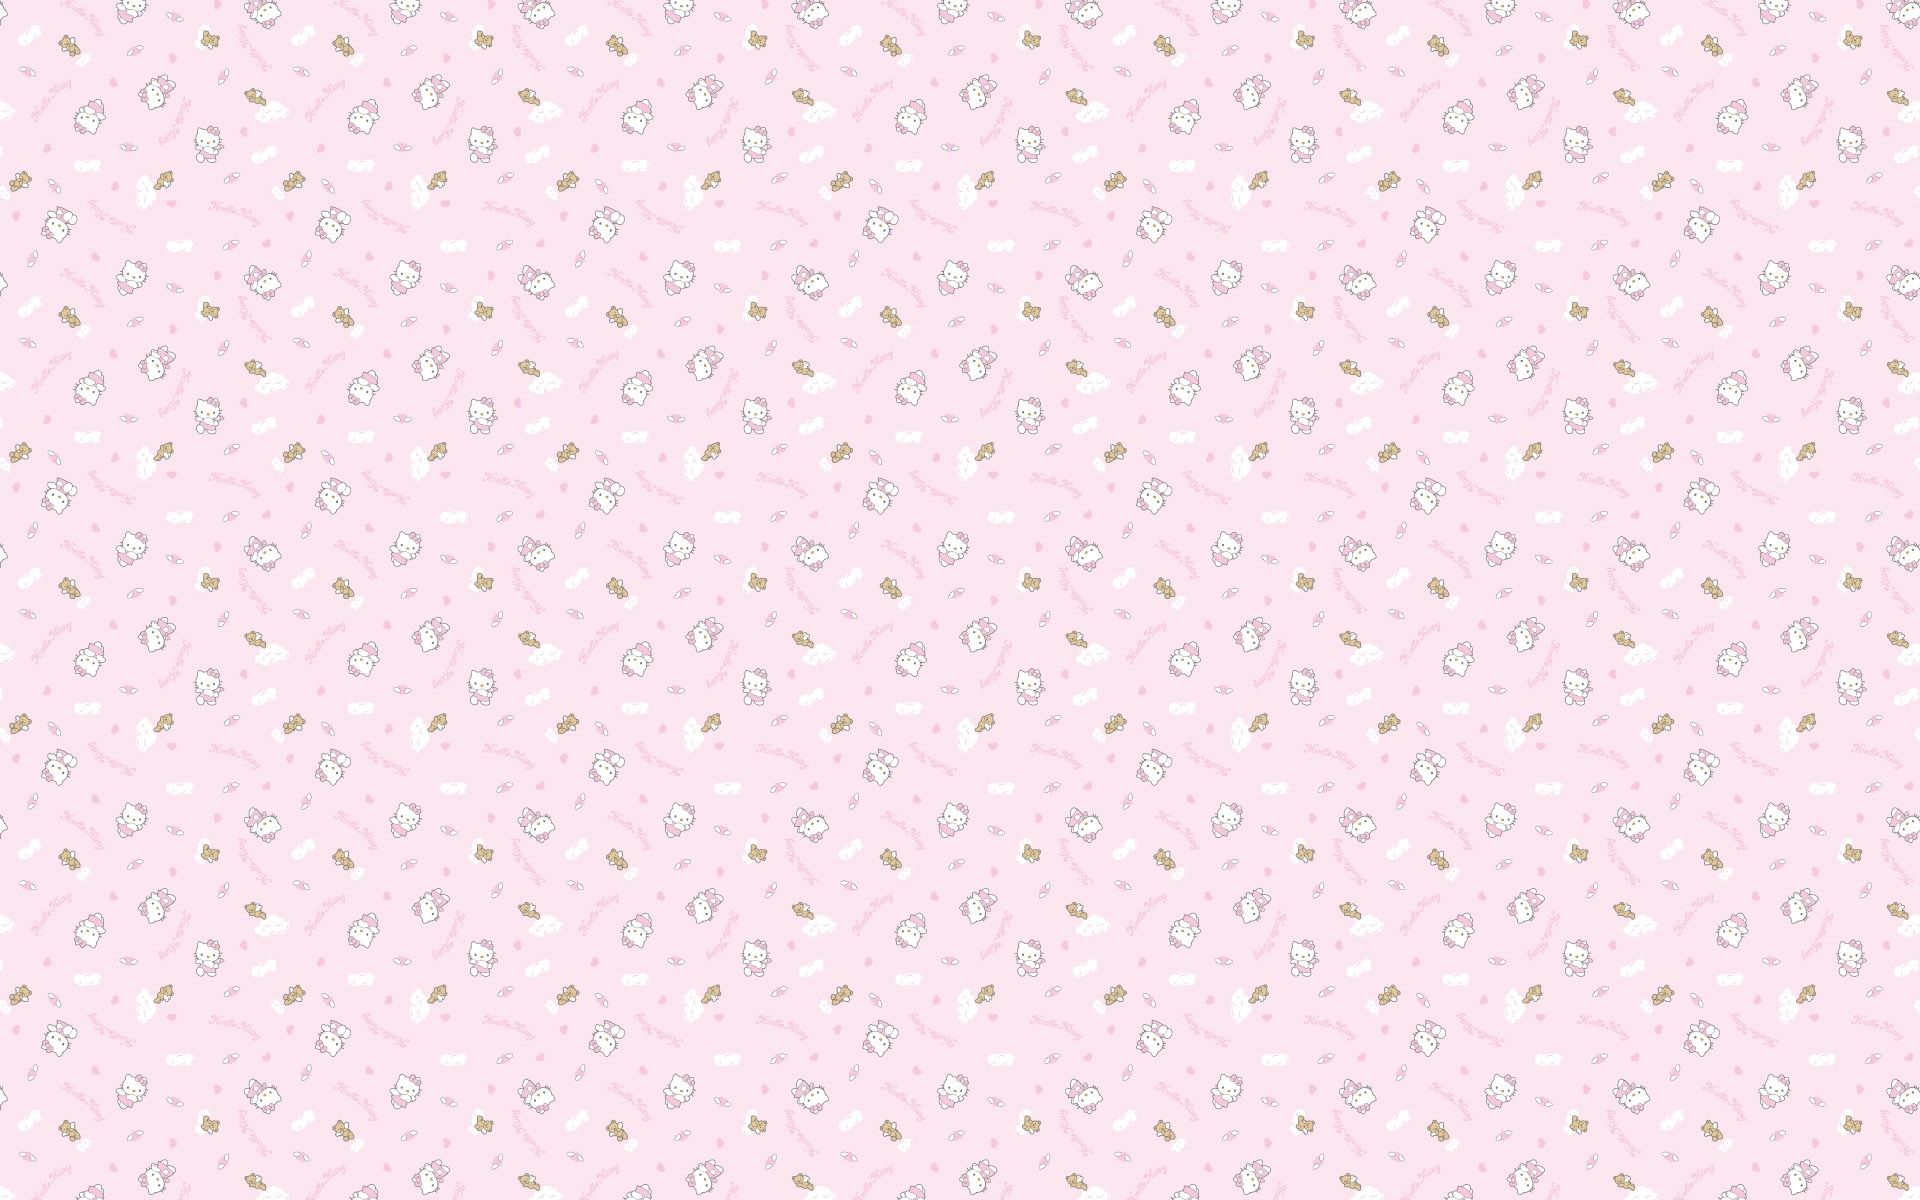 A pink and white polka dot pattern - Hello Kitty